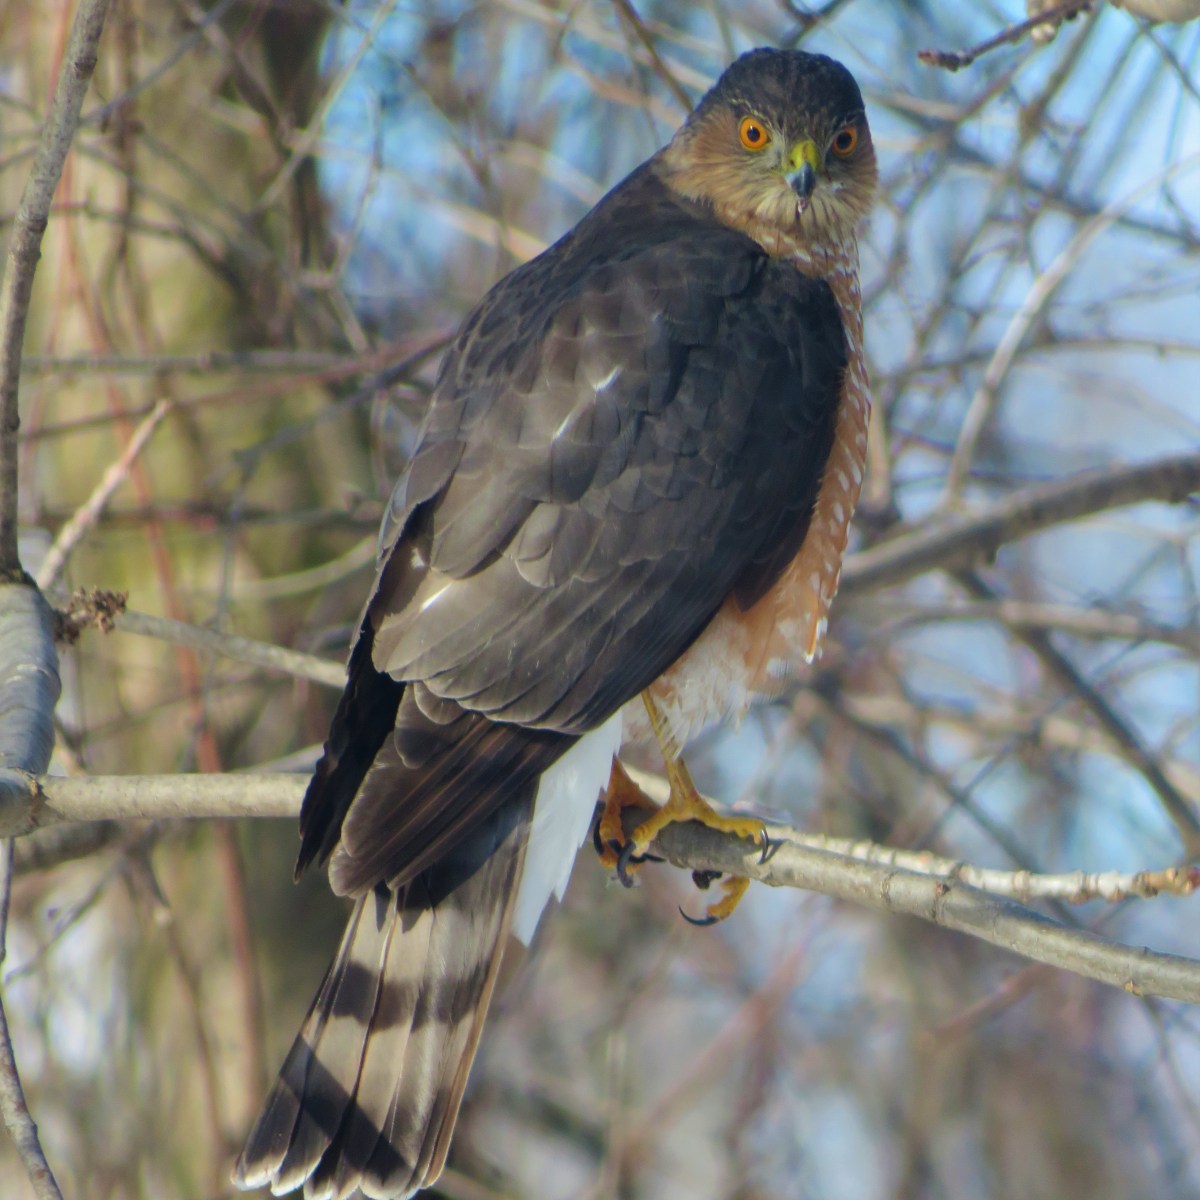 A Sharp-shinned hawk perched in a tree